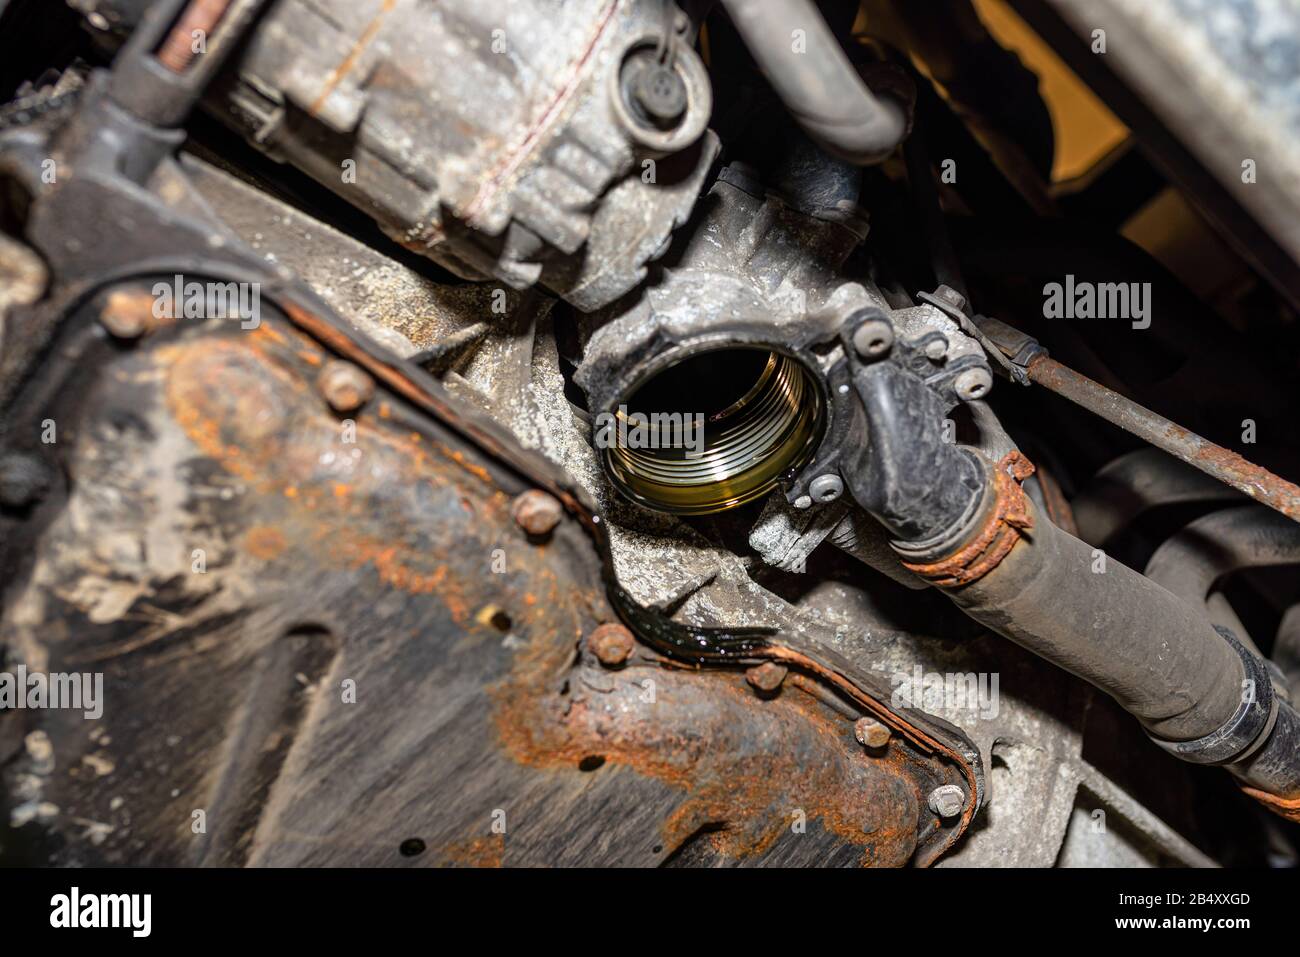 Unscrewed oil filter in the diesel engine from its mounting place at the bottom of the engine next to the oil pan. Stock Photo